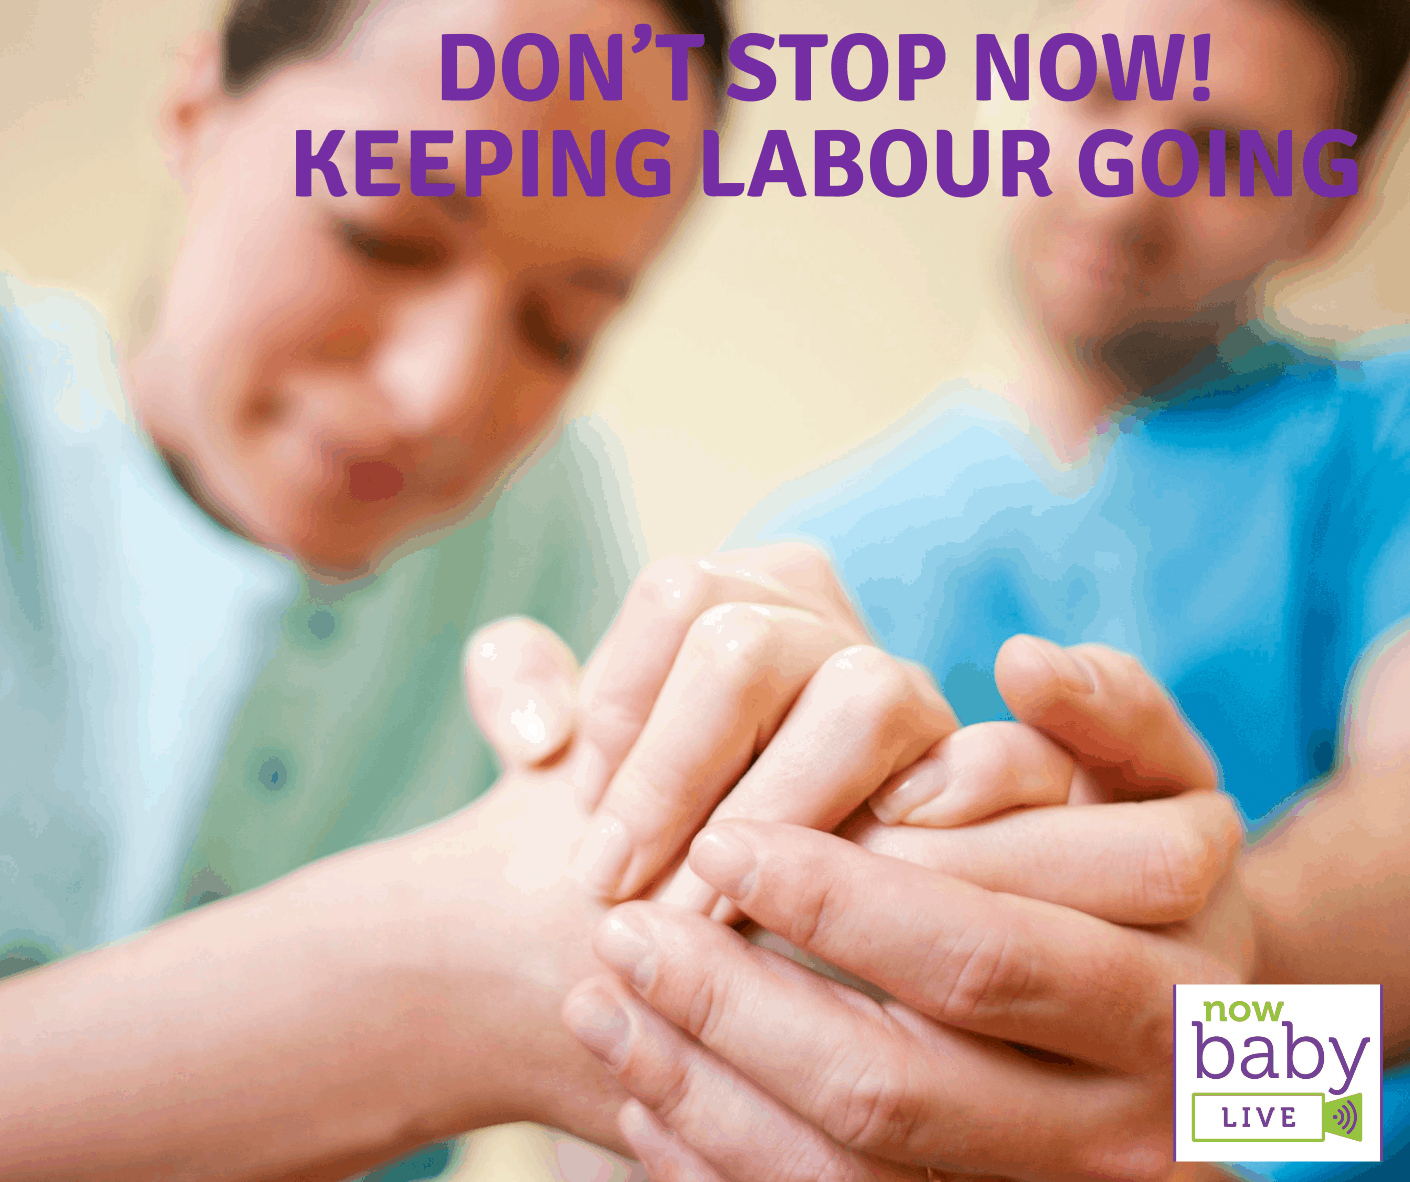 Don’t stop now! Keeping labour going